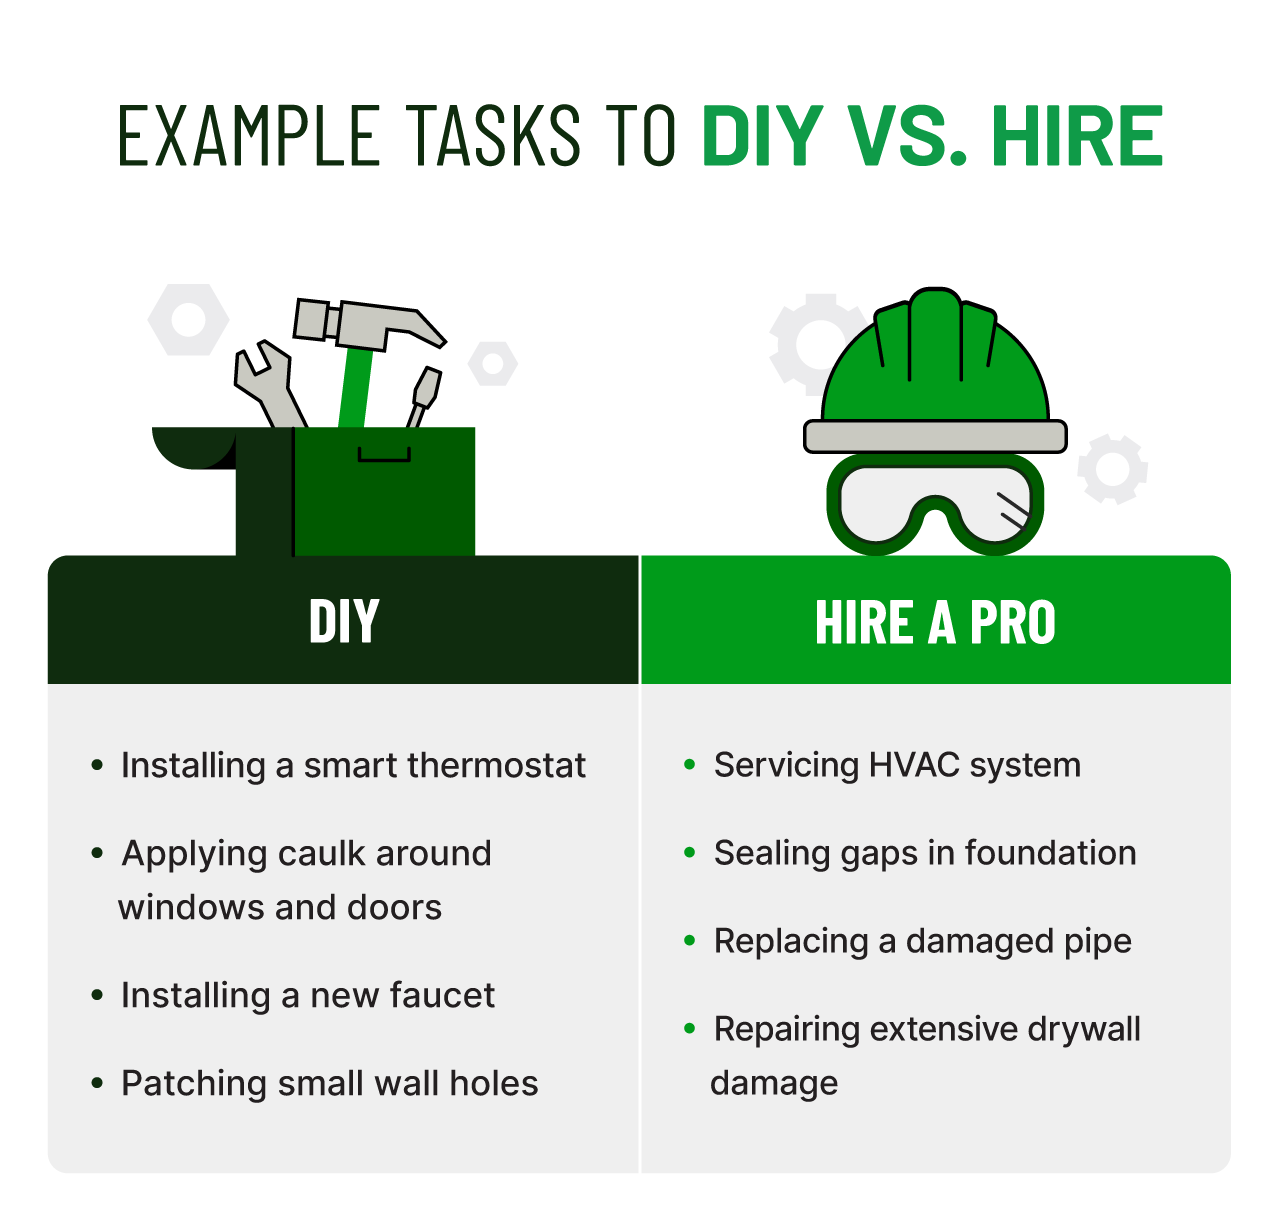 graphic sharing example tasks to DIY vs hire